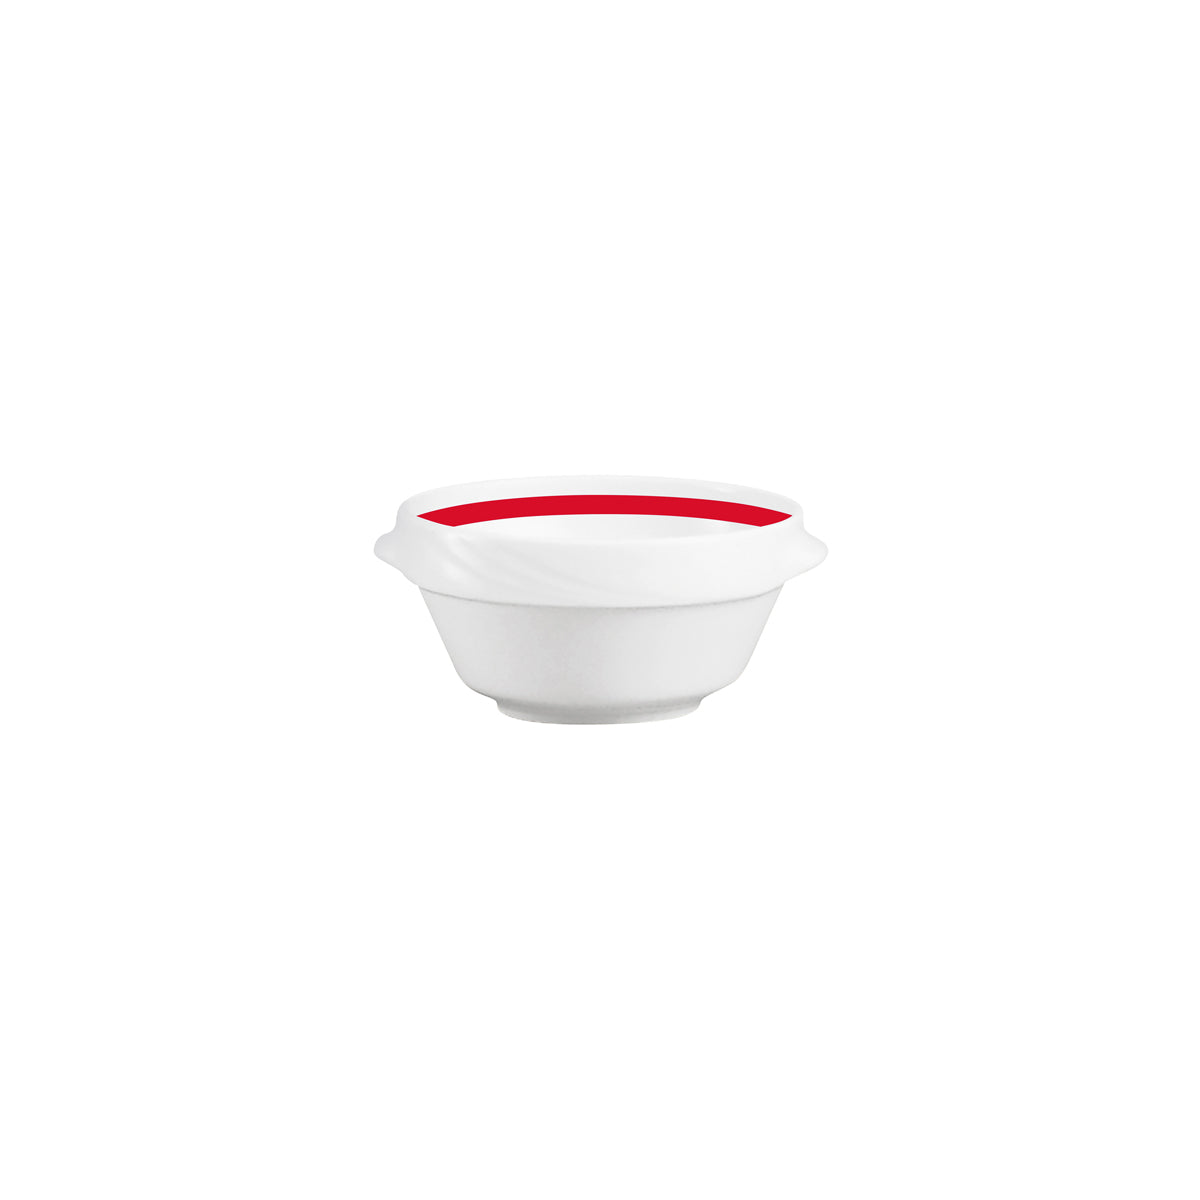 SH9185750/62931 Donna Senior Decor Stackable Round Soup Bowl with Red Band 132x67mm / 500ml Tomkin Australia Hospitality Supplies